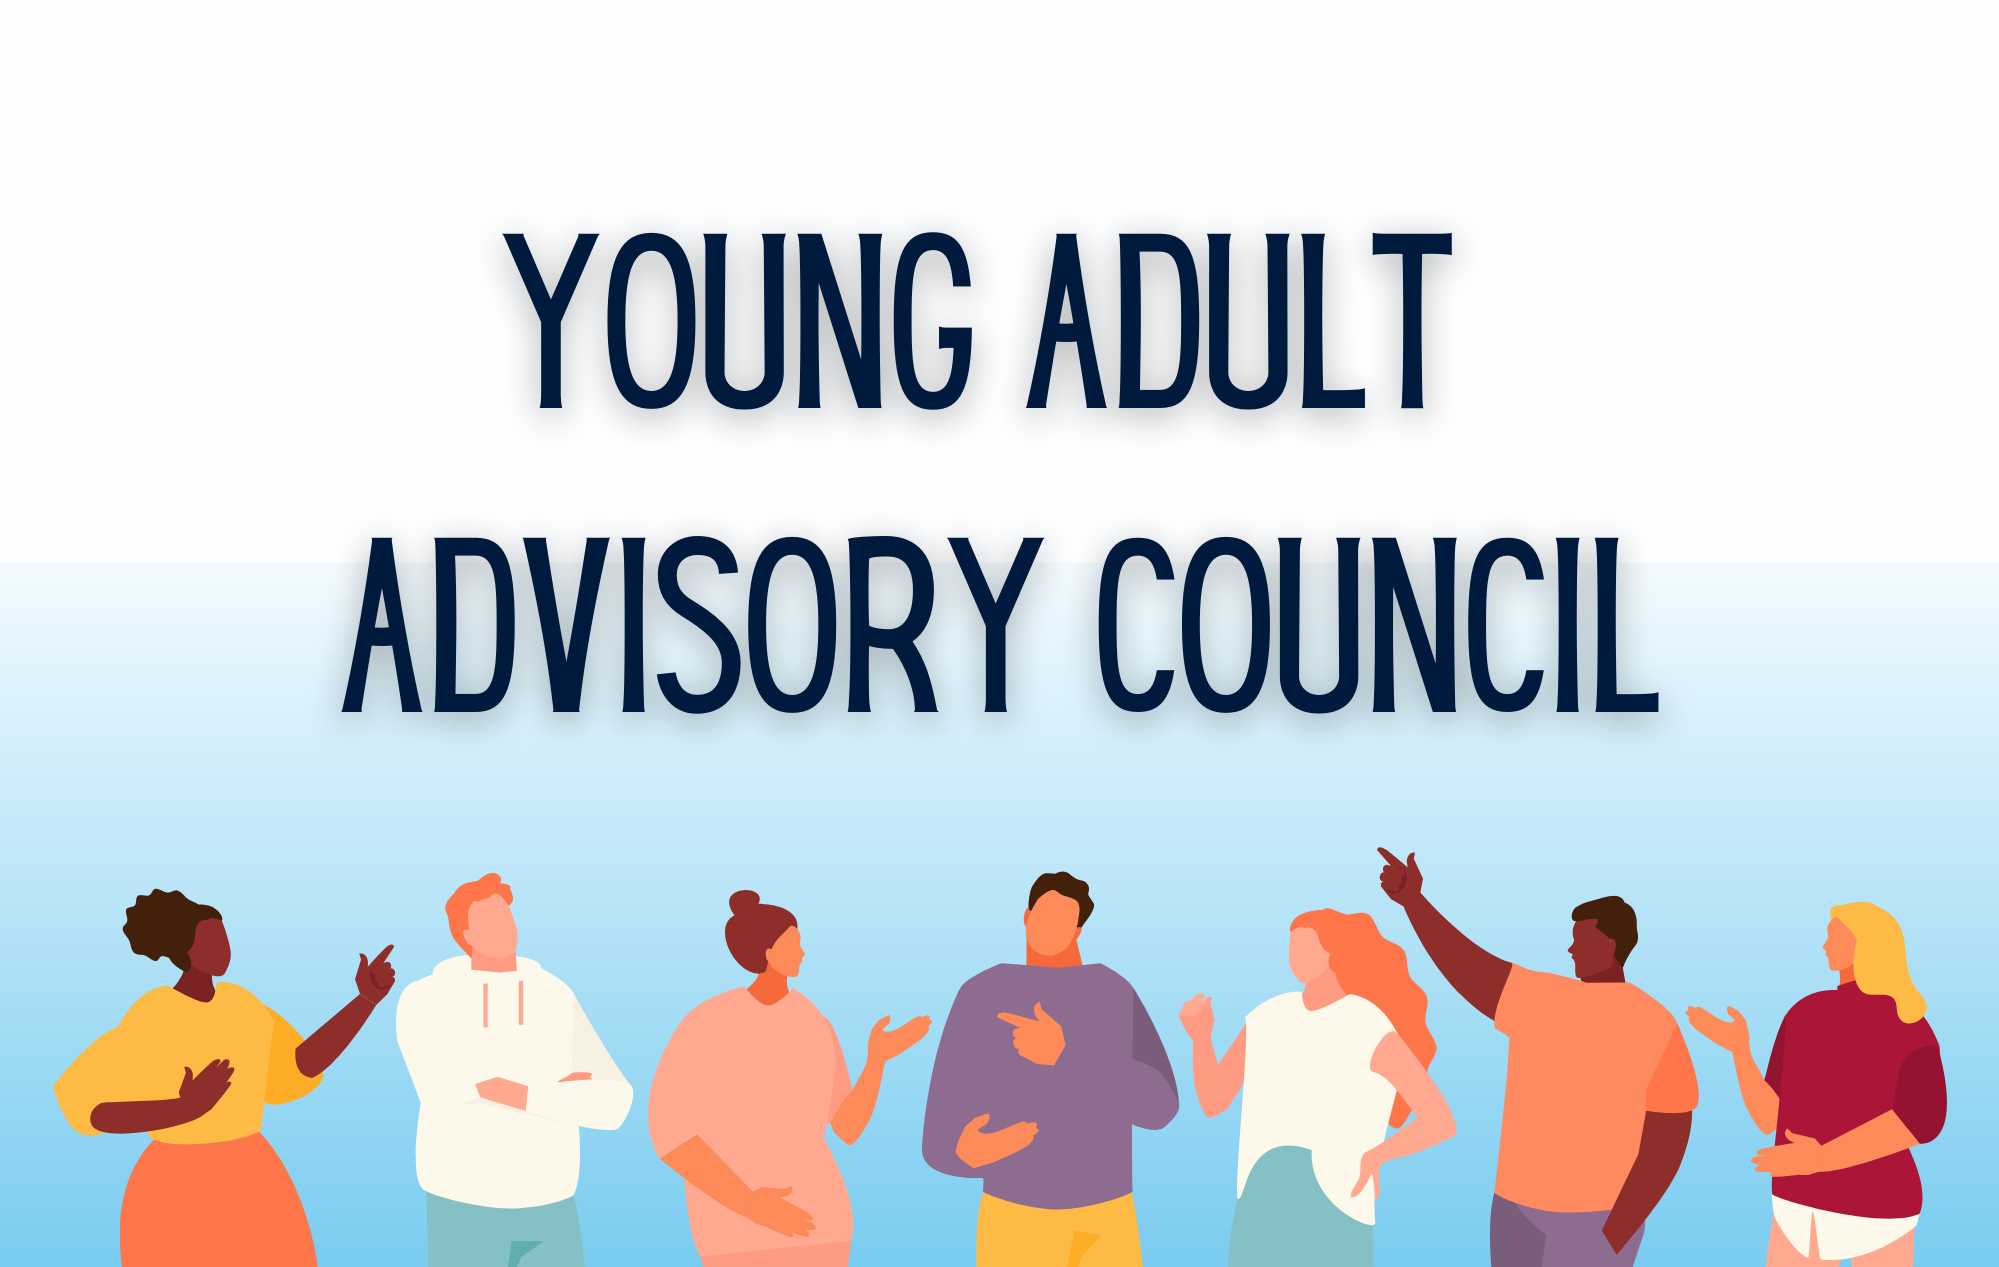 Graphic of abstract people underneath the words "Young Adult Advisory Council"